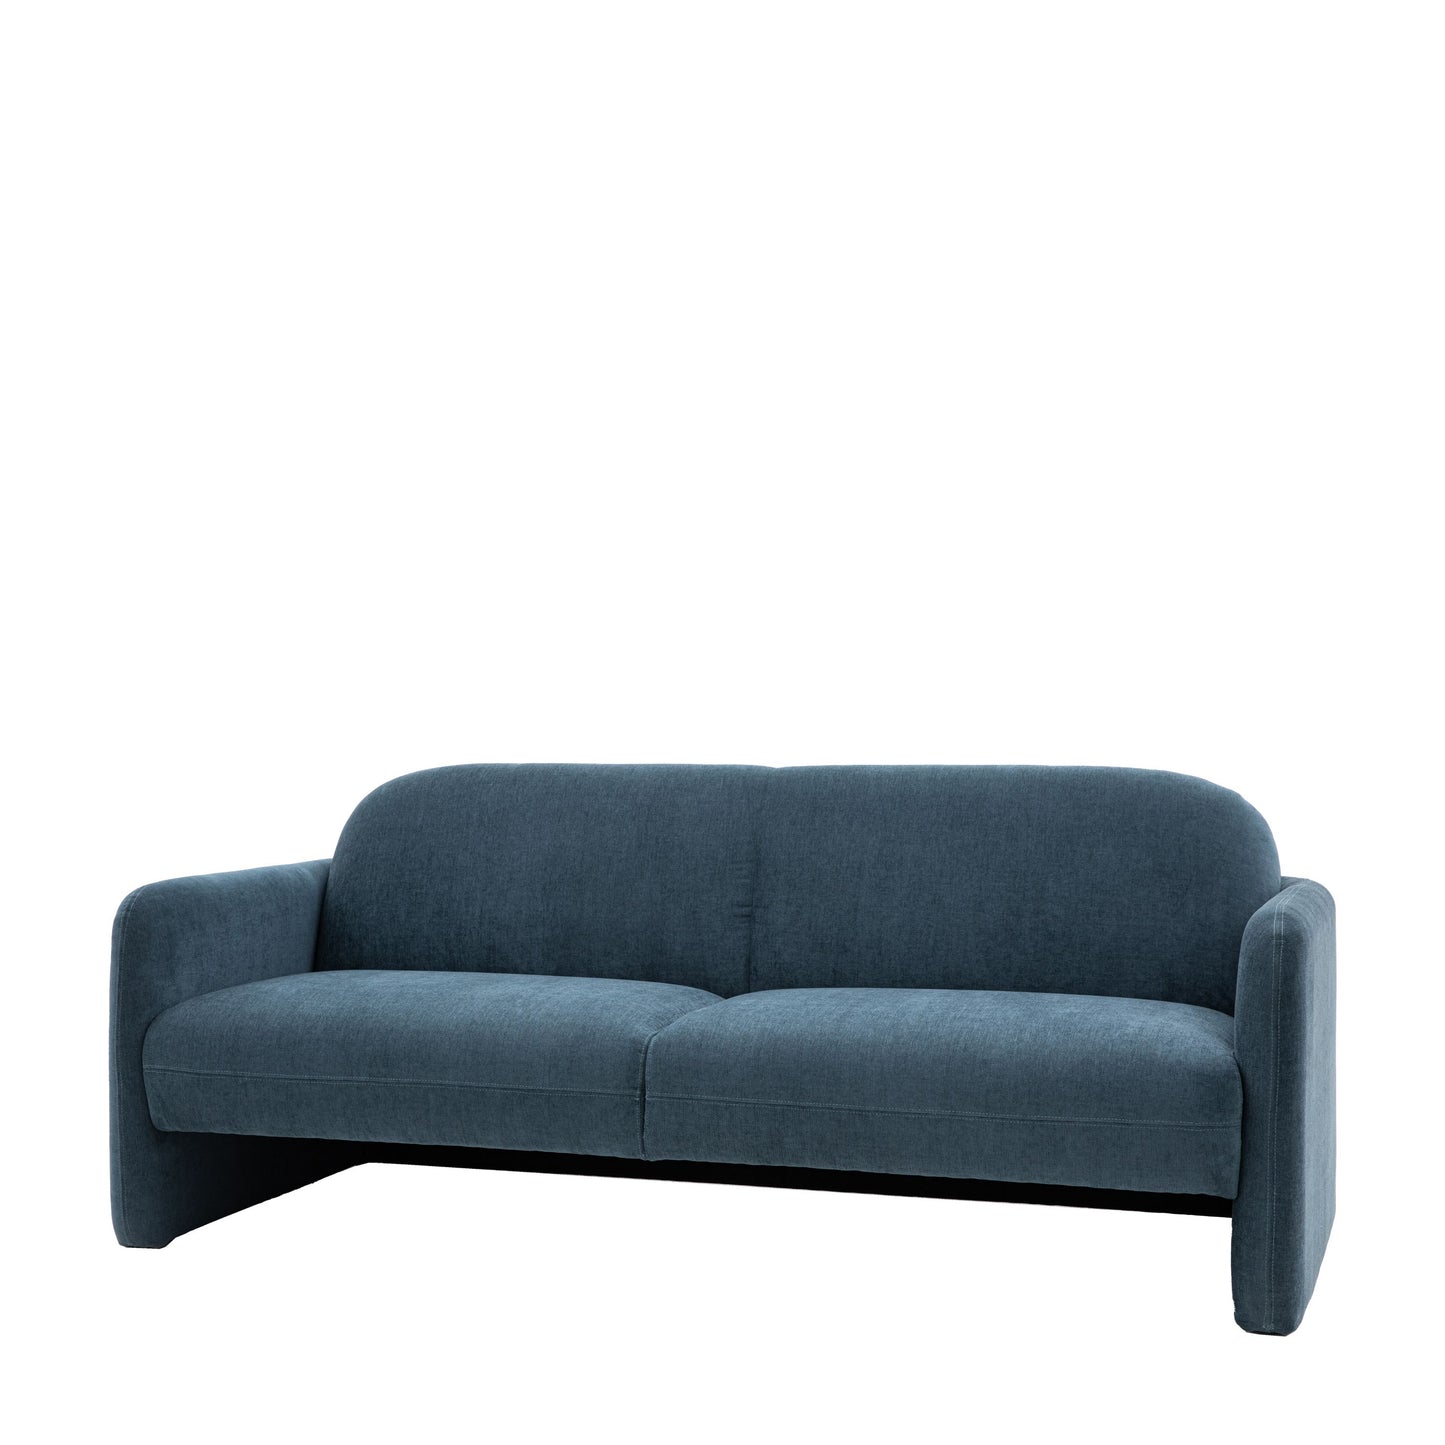 Blythe 3 Seater Sofa in Blue